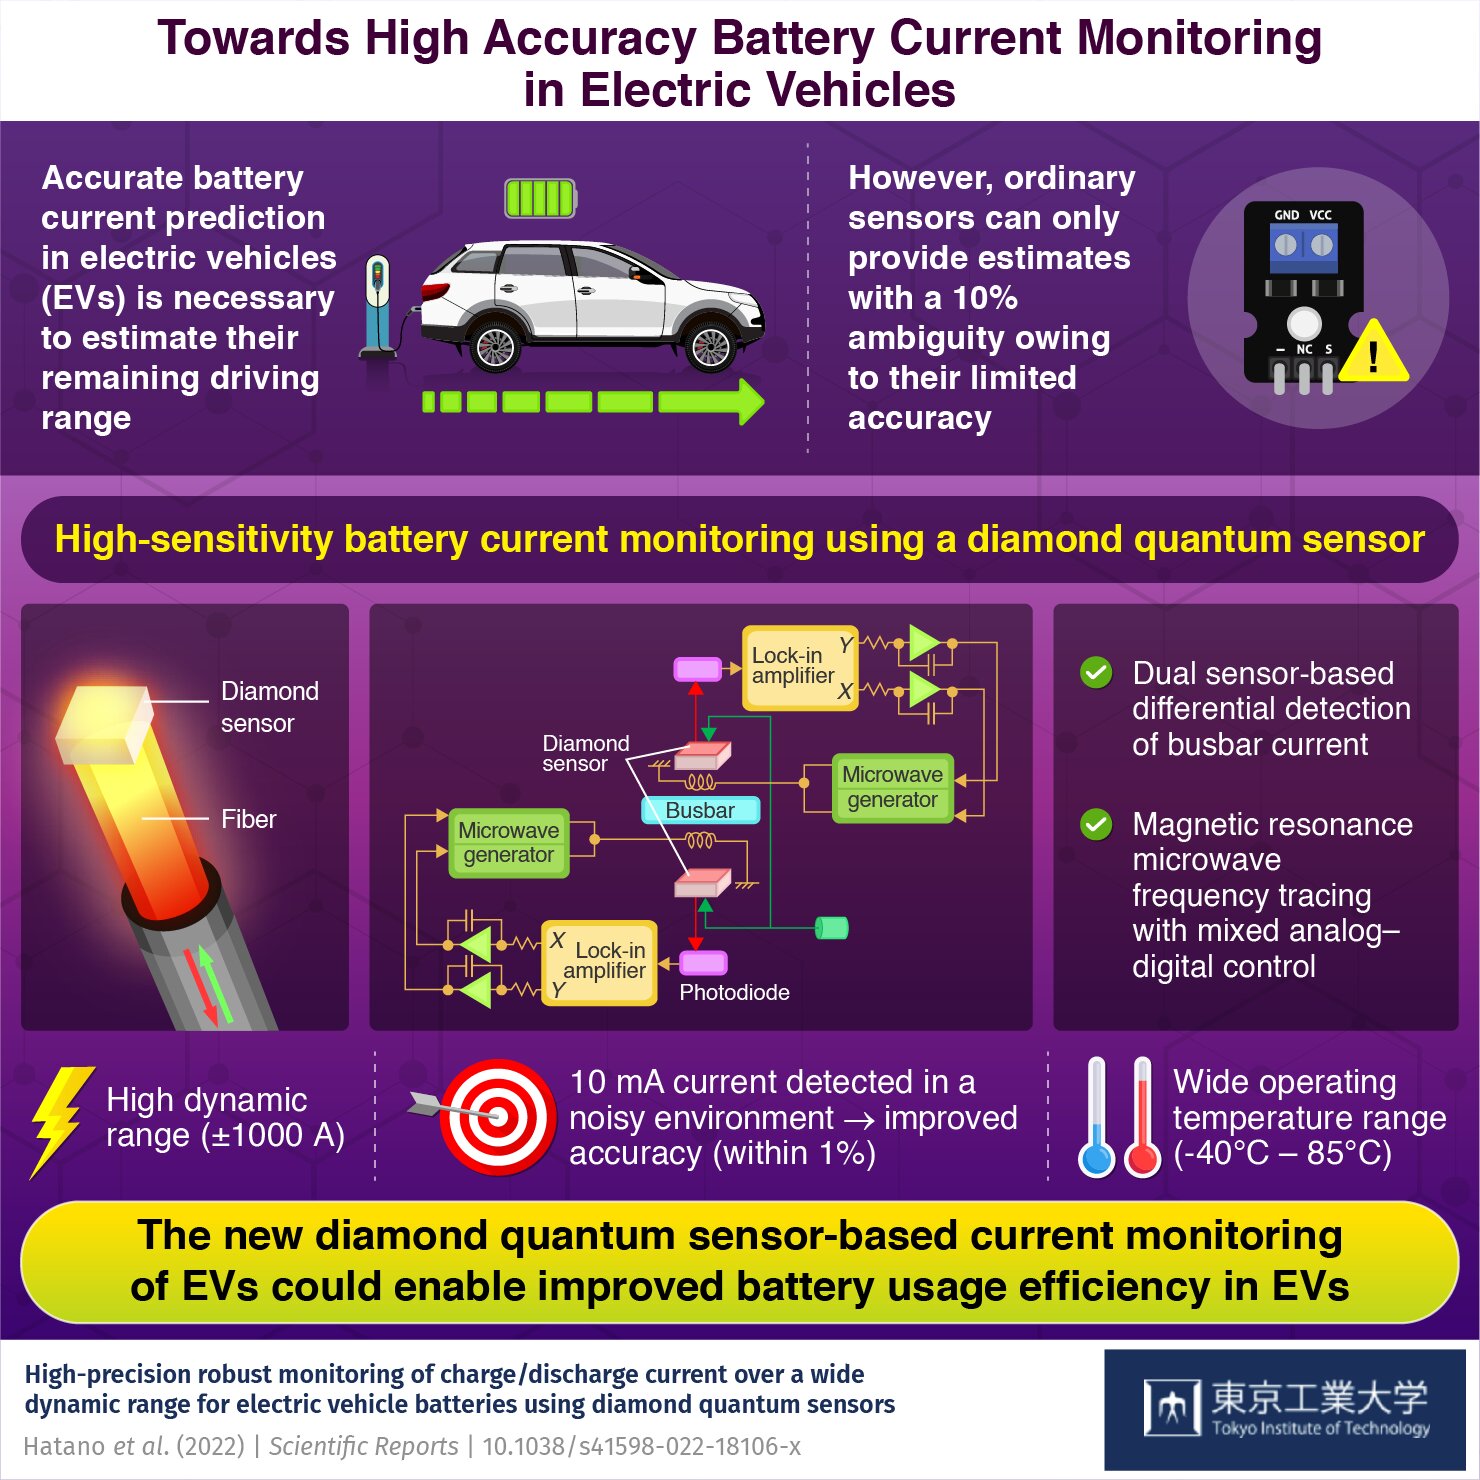 High-accuracy electric vehicle battery monitoring with diamond quantum sensors for driving range extension